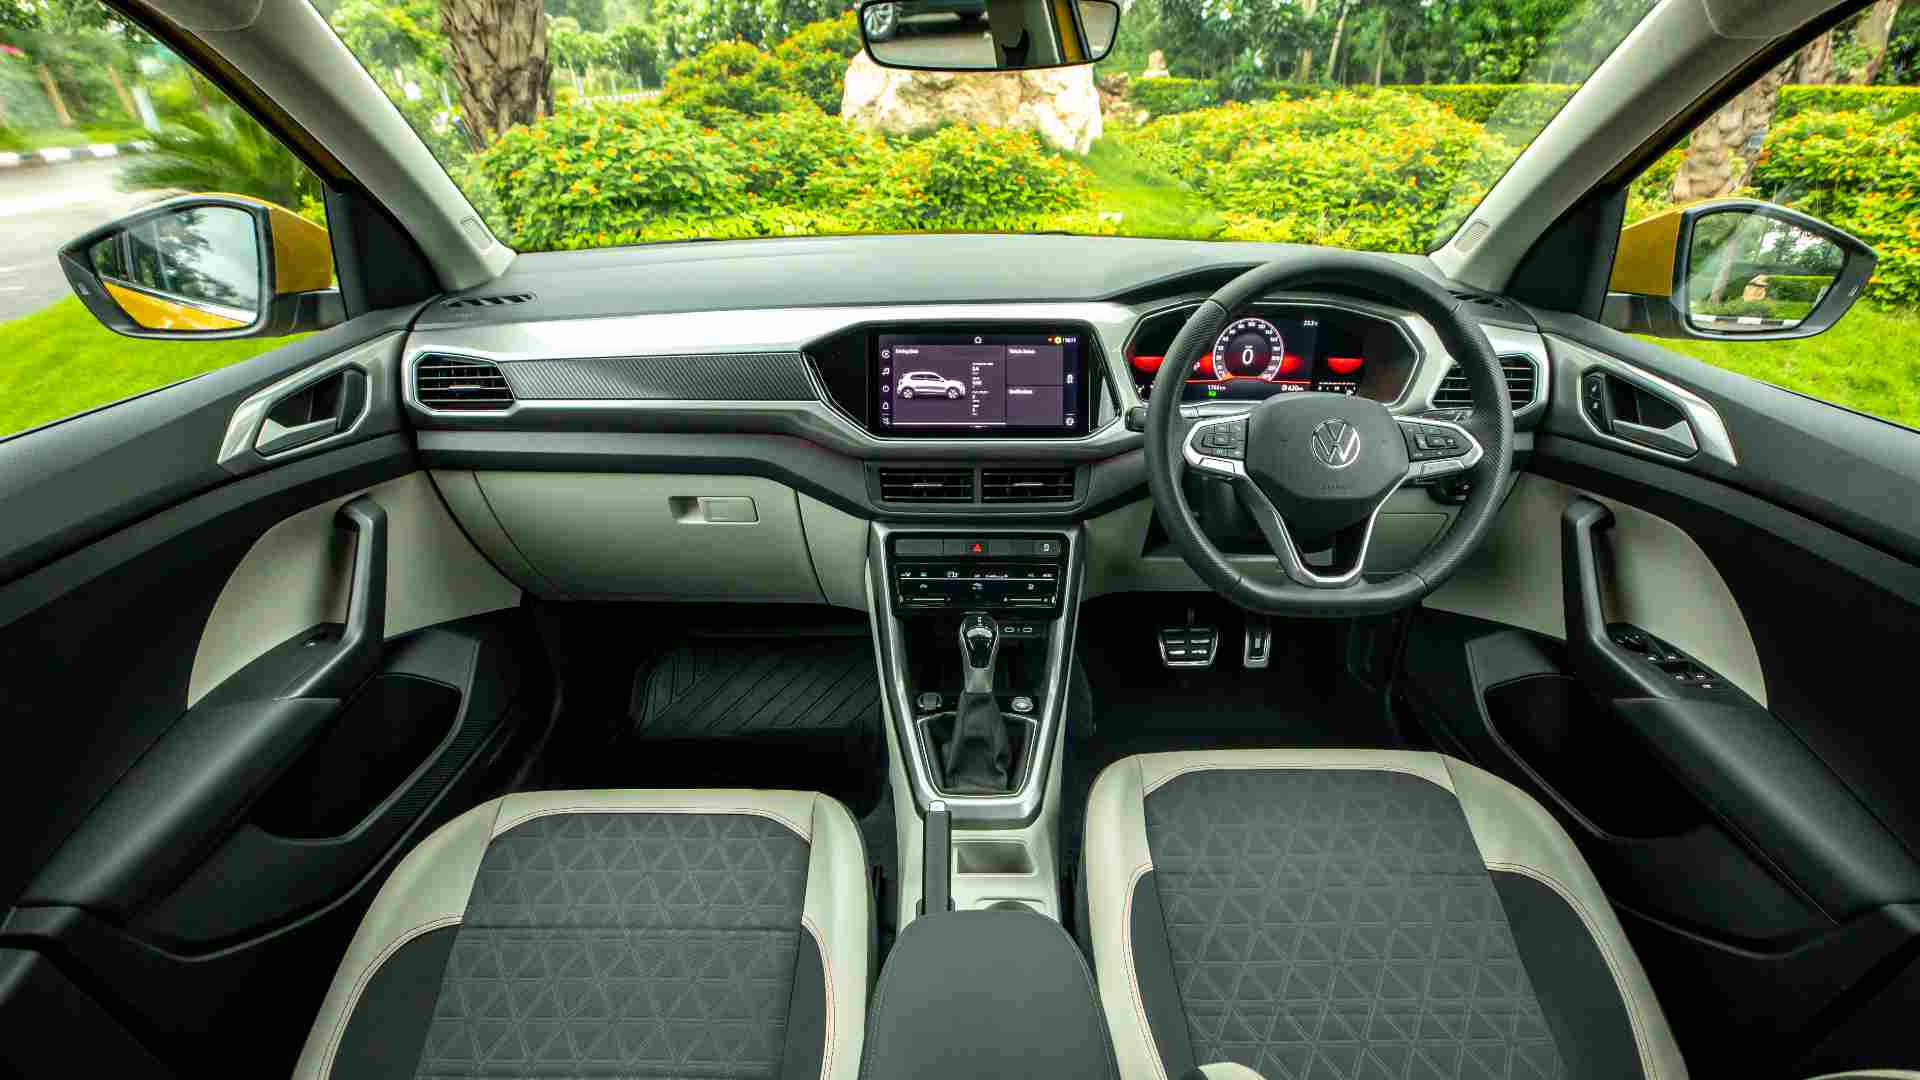 While some elements are carried over from the Skoda, the Taigun's interior has enough differentiators of its own. Image: Volkswagen